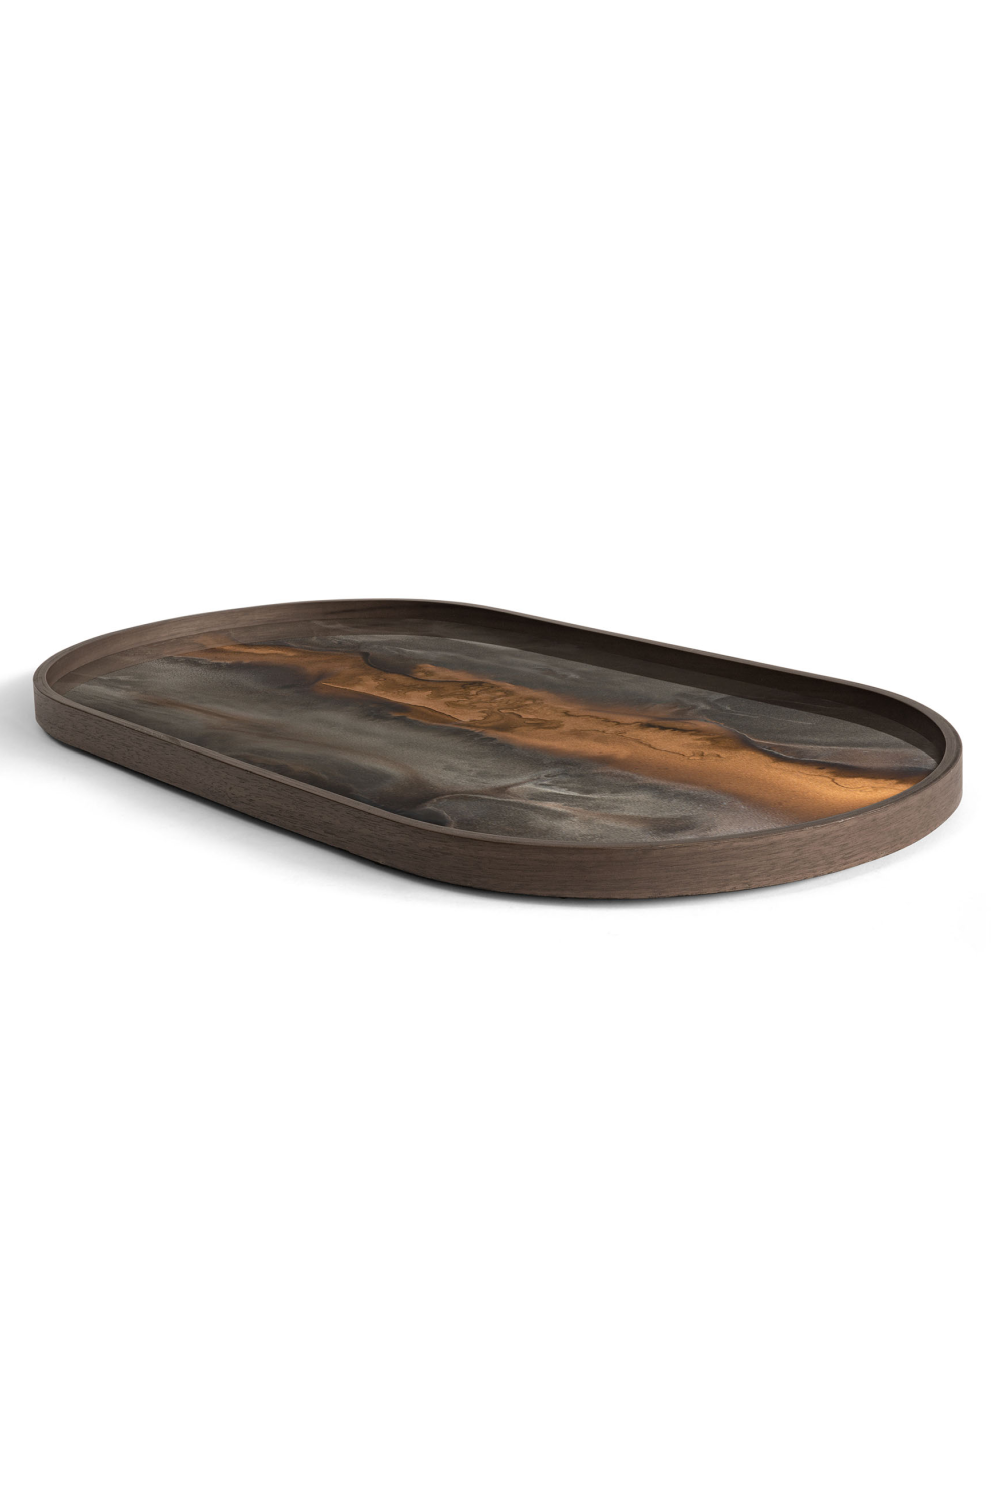 Oblong Hand-Painted Glass Tray | Ethnicraft Organic | OROA.COM